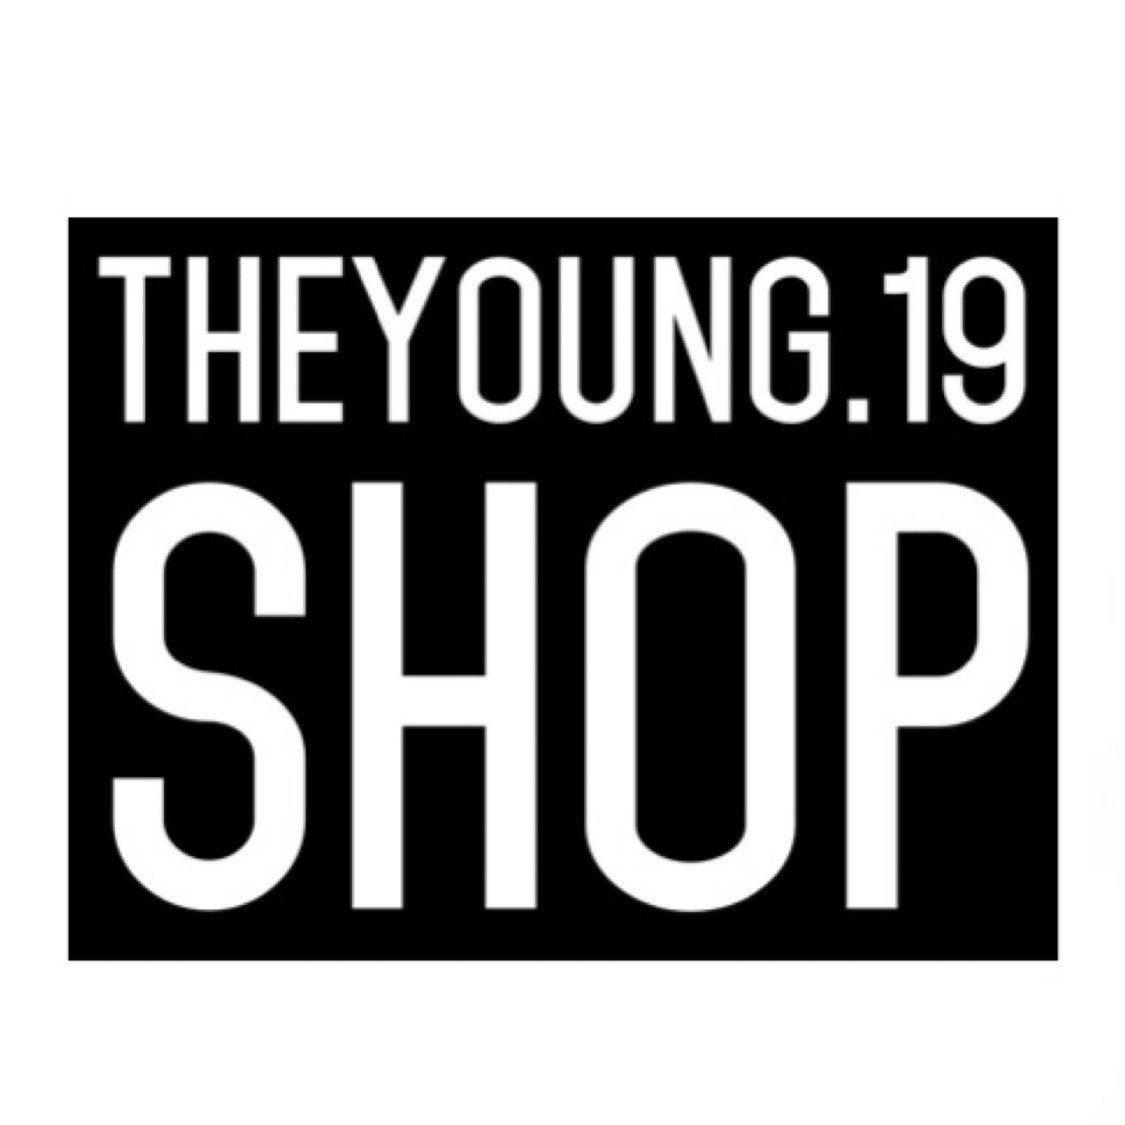 TheYoung.19 Shop